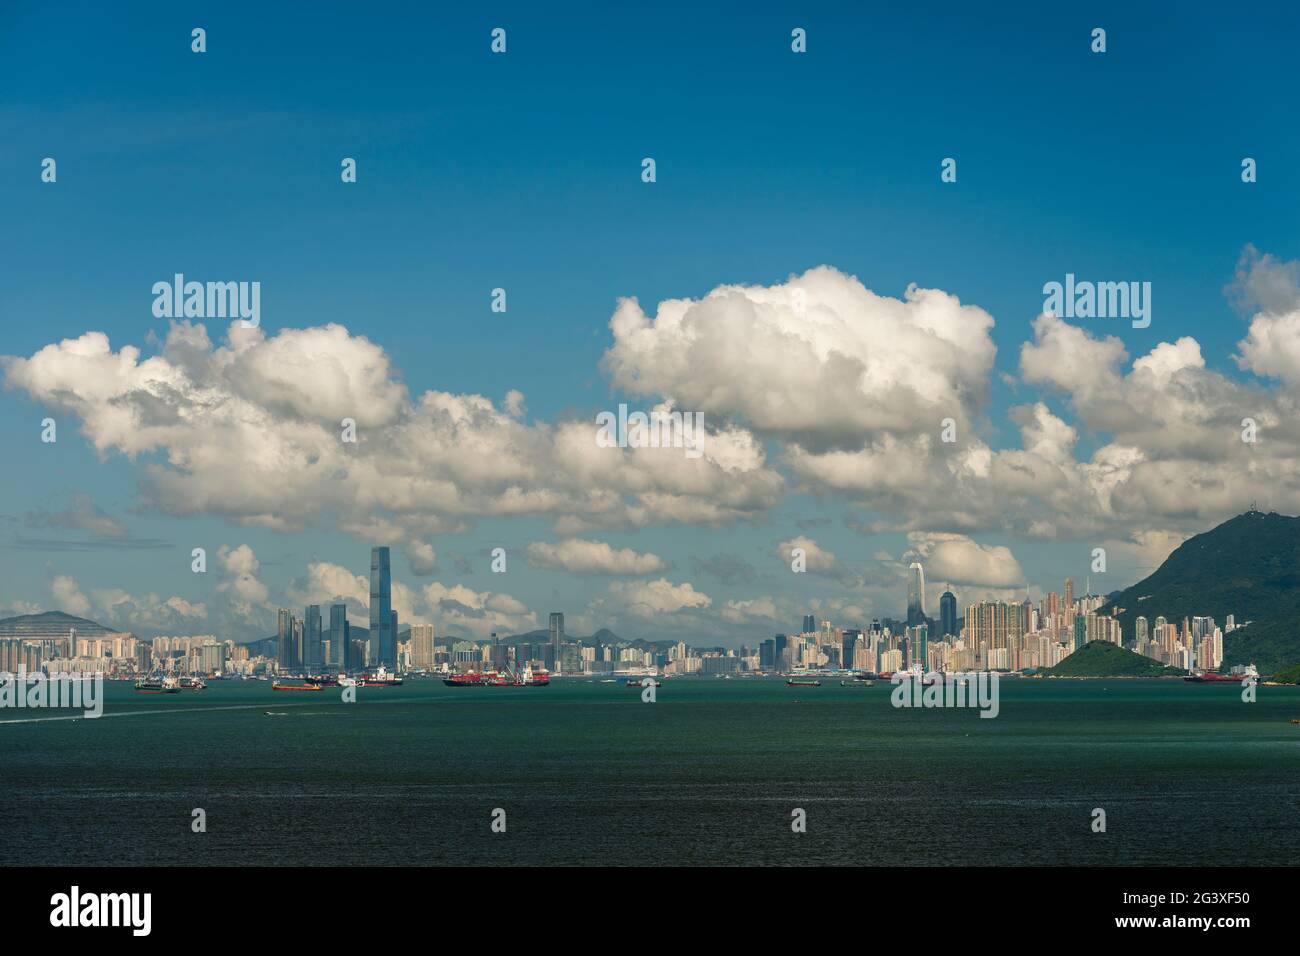 The city skyline of Kowloon and Hong Kong Island, viewed from Lantau Island to the west, in the afternoon on a clear summer day Stock Photo